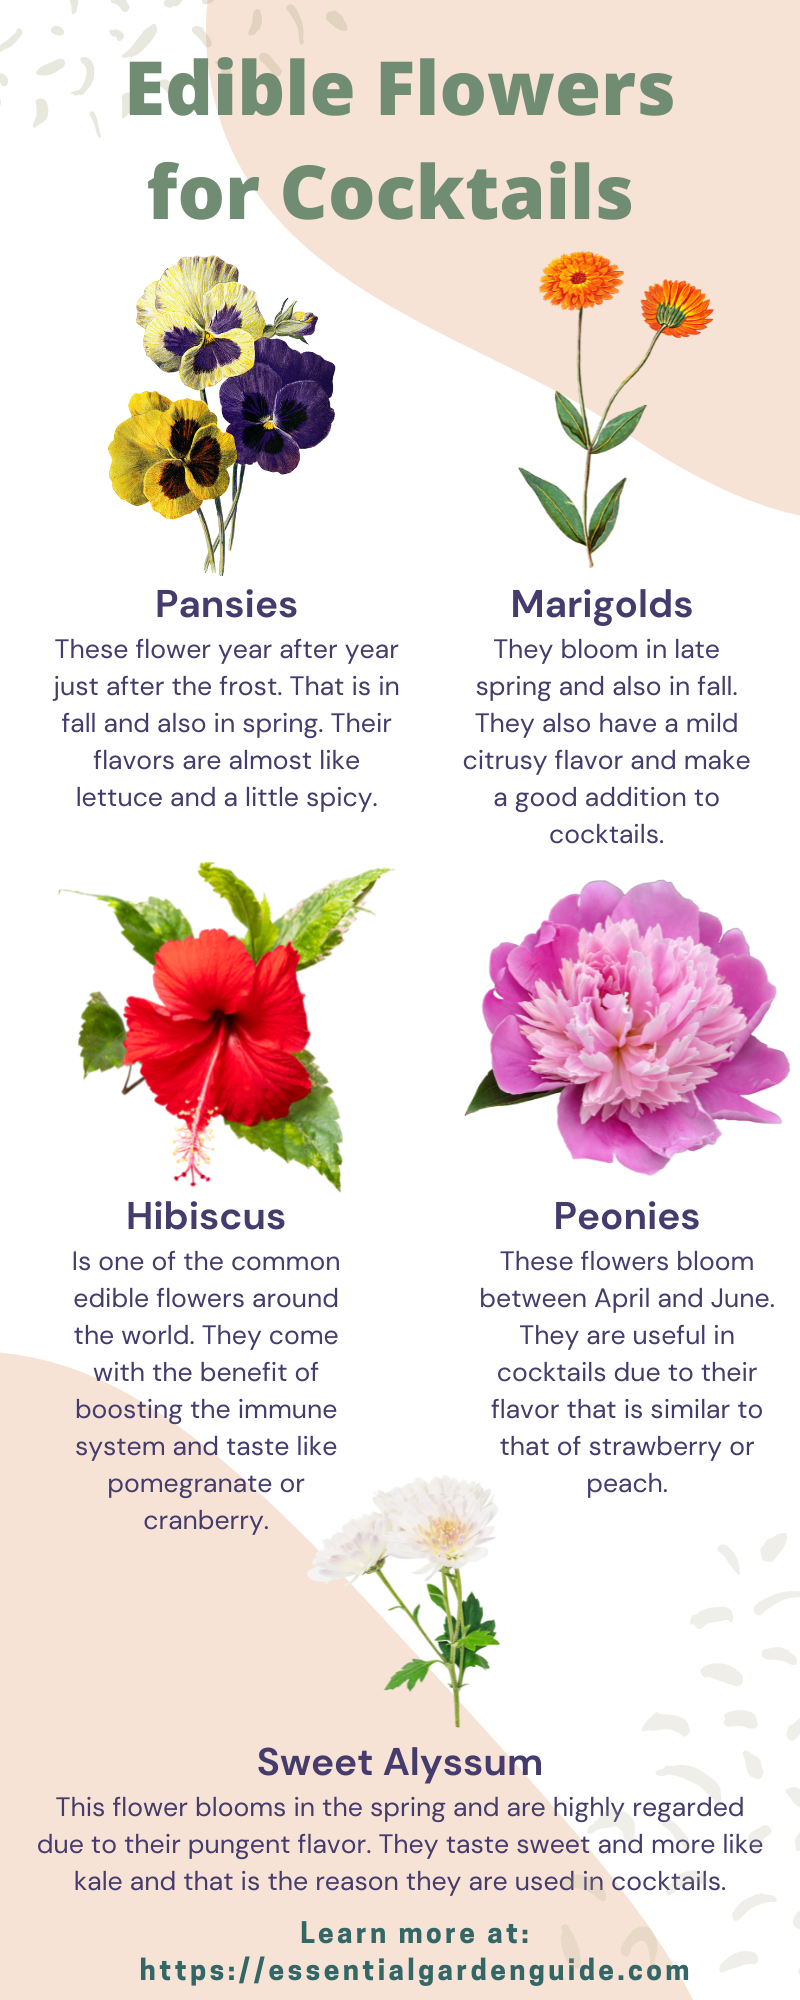 Infographic Edible Flowers for Cocktails